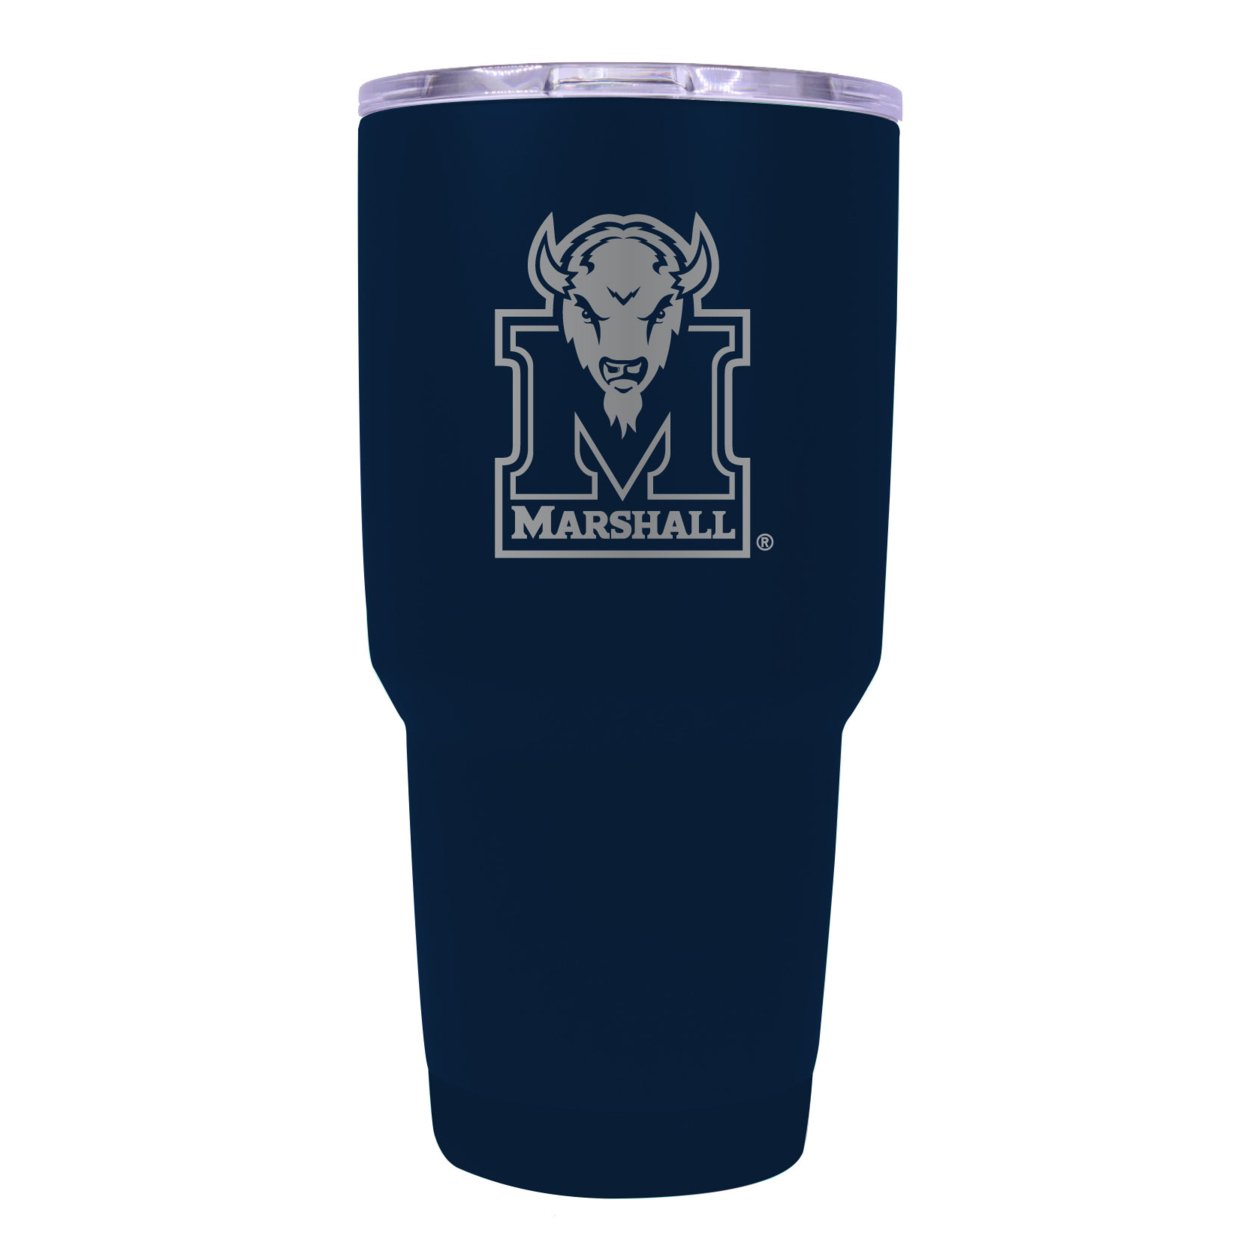 Marshall Thundering Herd 24 Oz Insulated Tumbler Etched - Choose Your Color - Navy